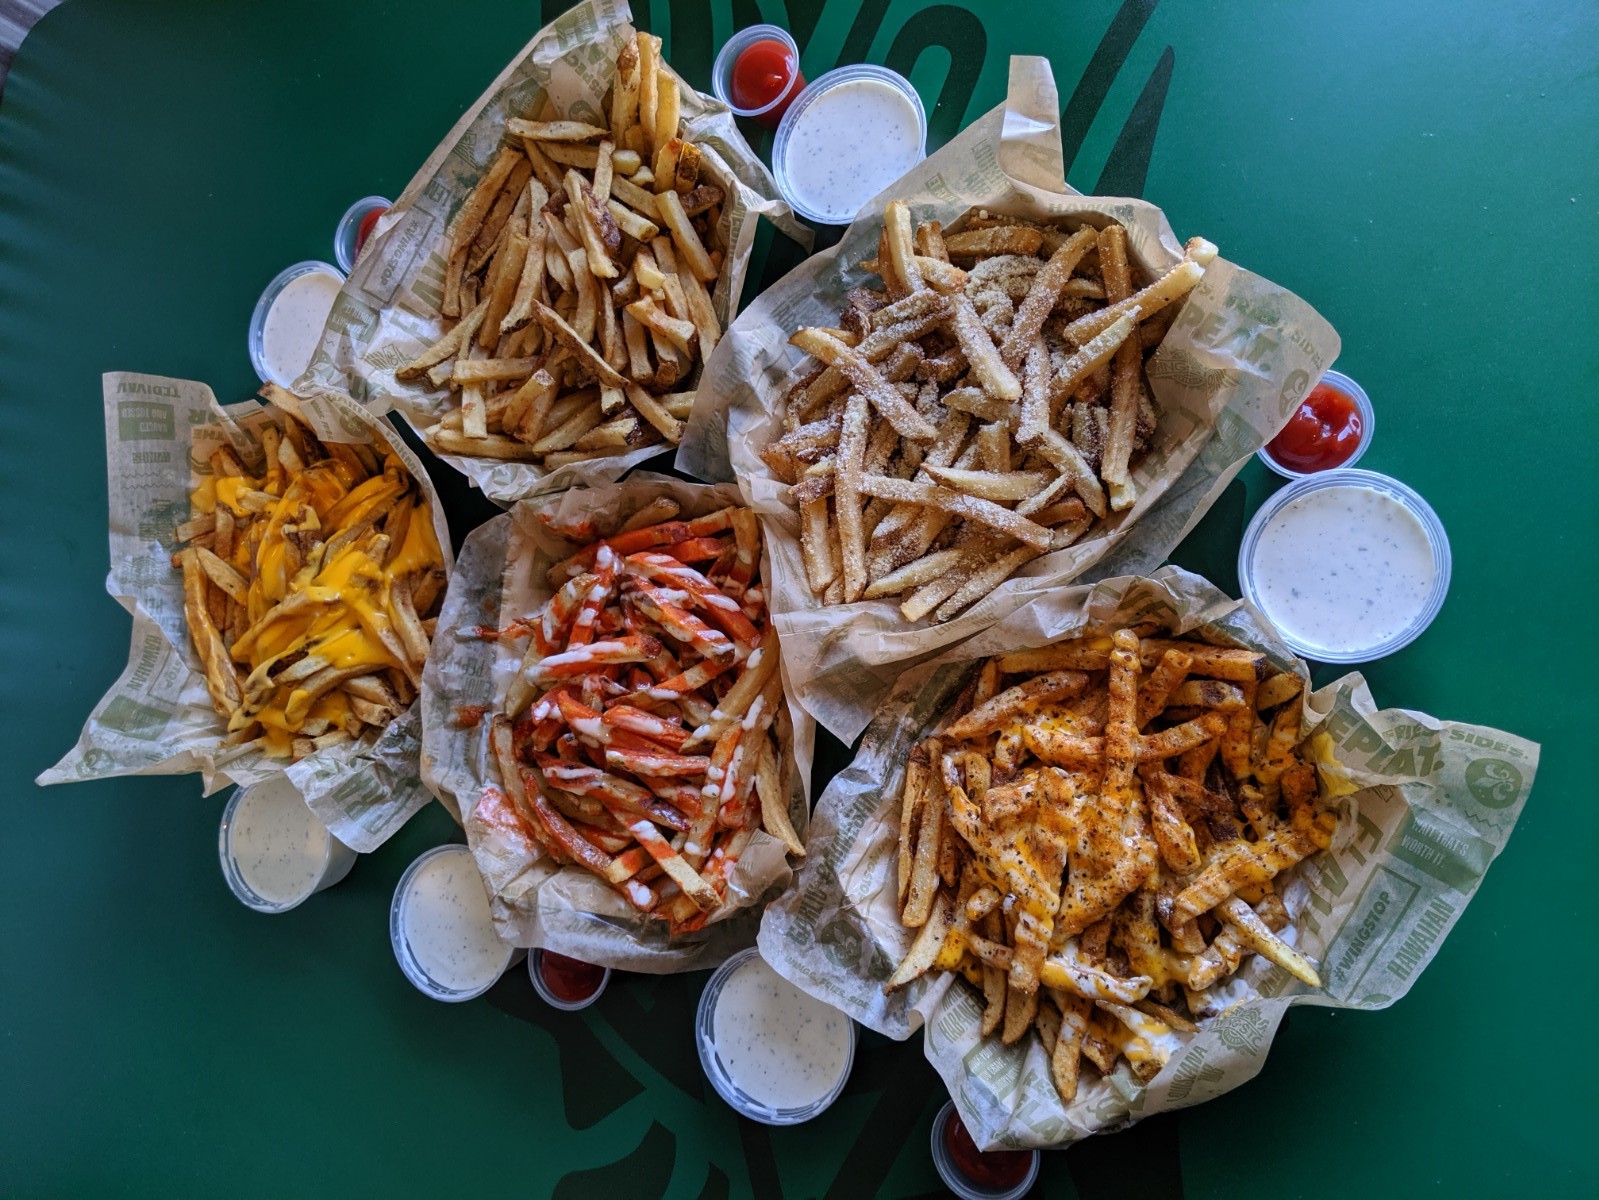 Celebrate National French Fry Day with Wingstop - WINGSIDER